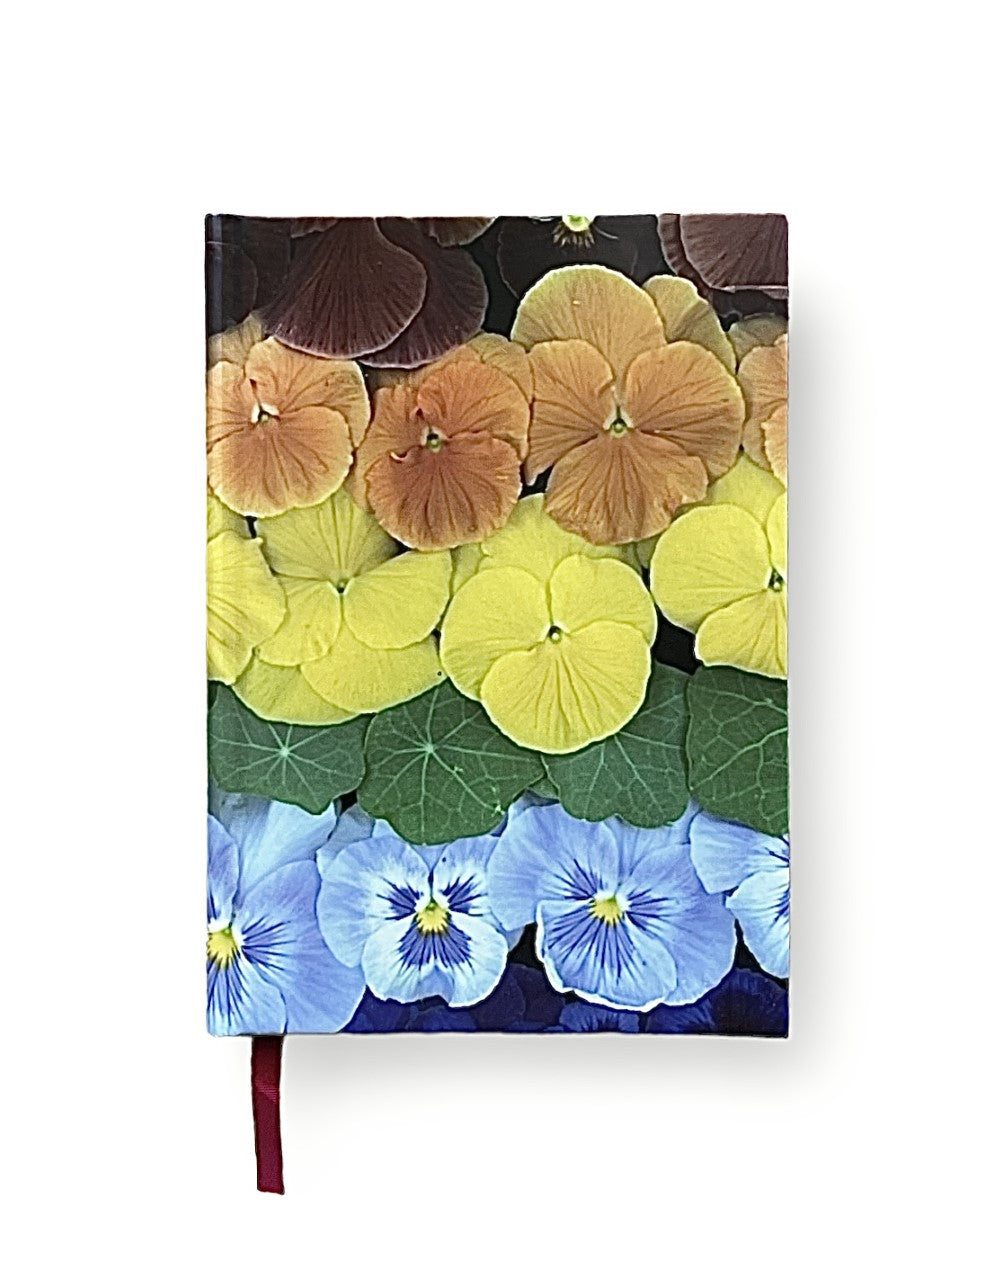 maz ghani, wildflowers, hardcover journal, journal, book, write, luxury gifts, gifts, shop, colorful, flowers, botanical, pride